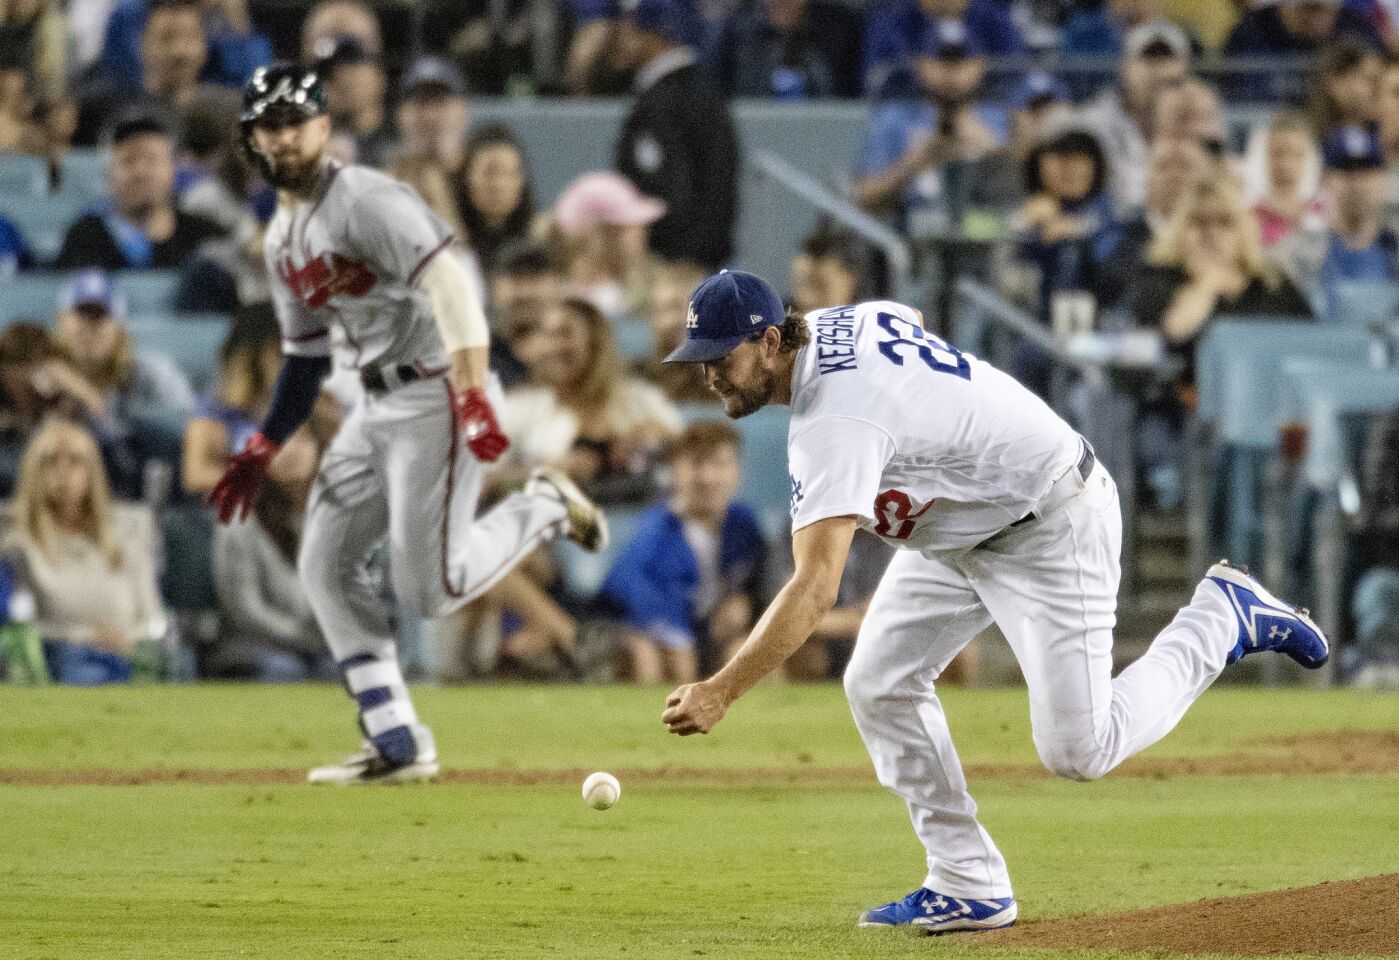 Dodgers starting pitcher Clayton Kershaw can't get a hand on an infield hit by Atlanta Braves center fielder Ender Inciarte.